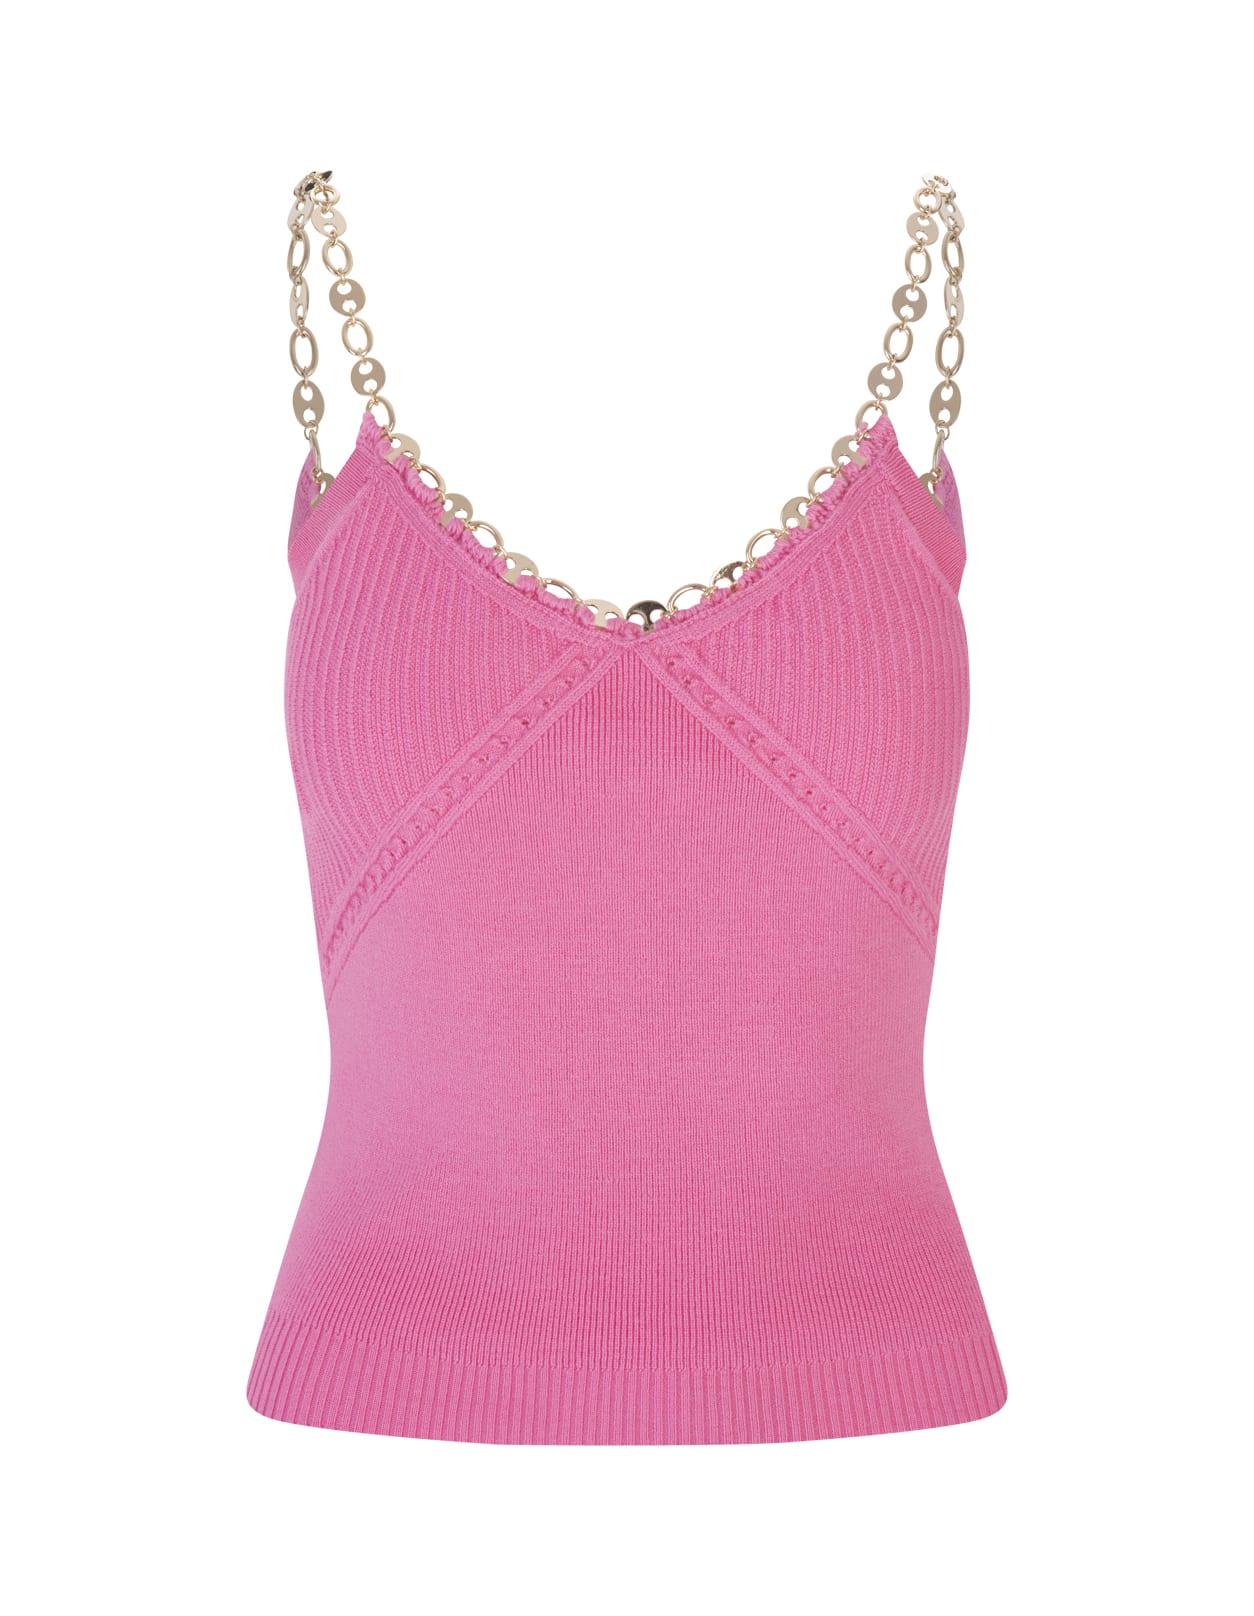 Paco Rabanne Woman Pink Knitted Top With Chain Straps